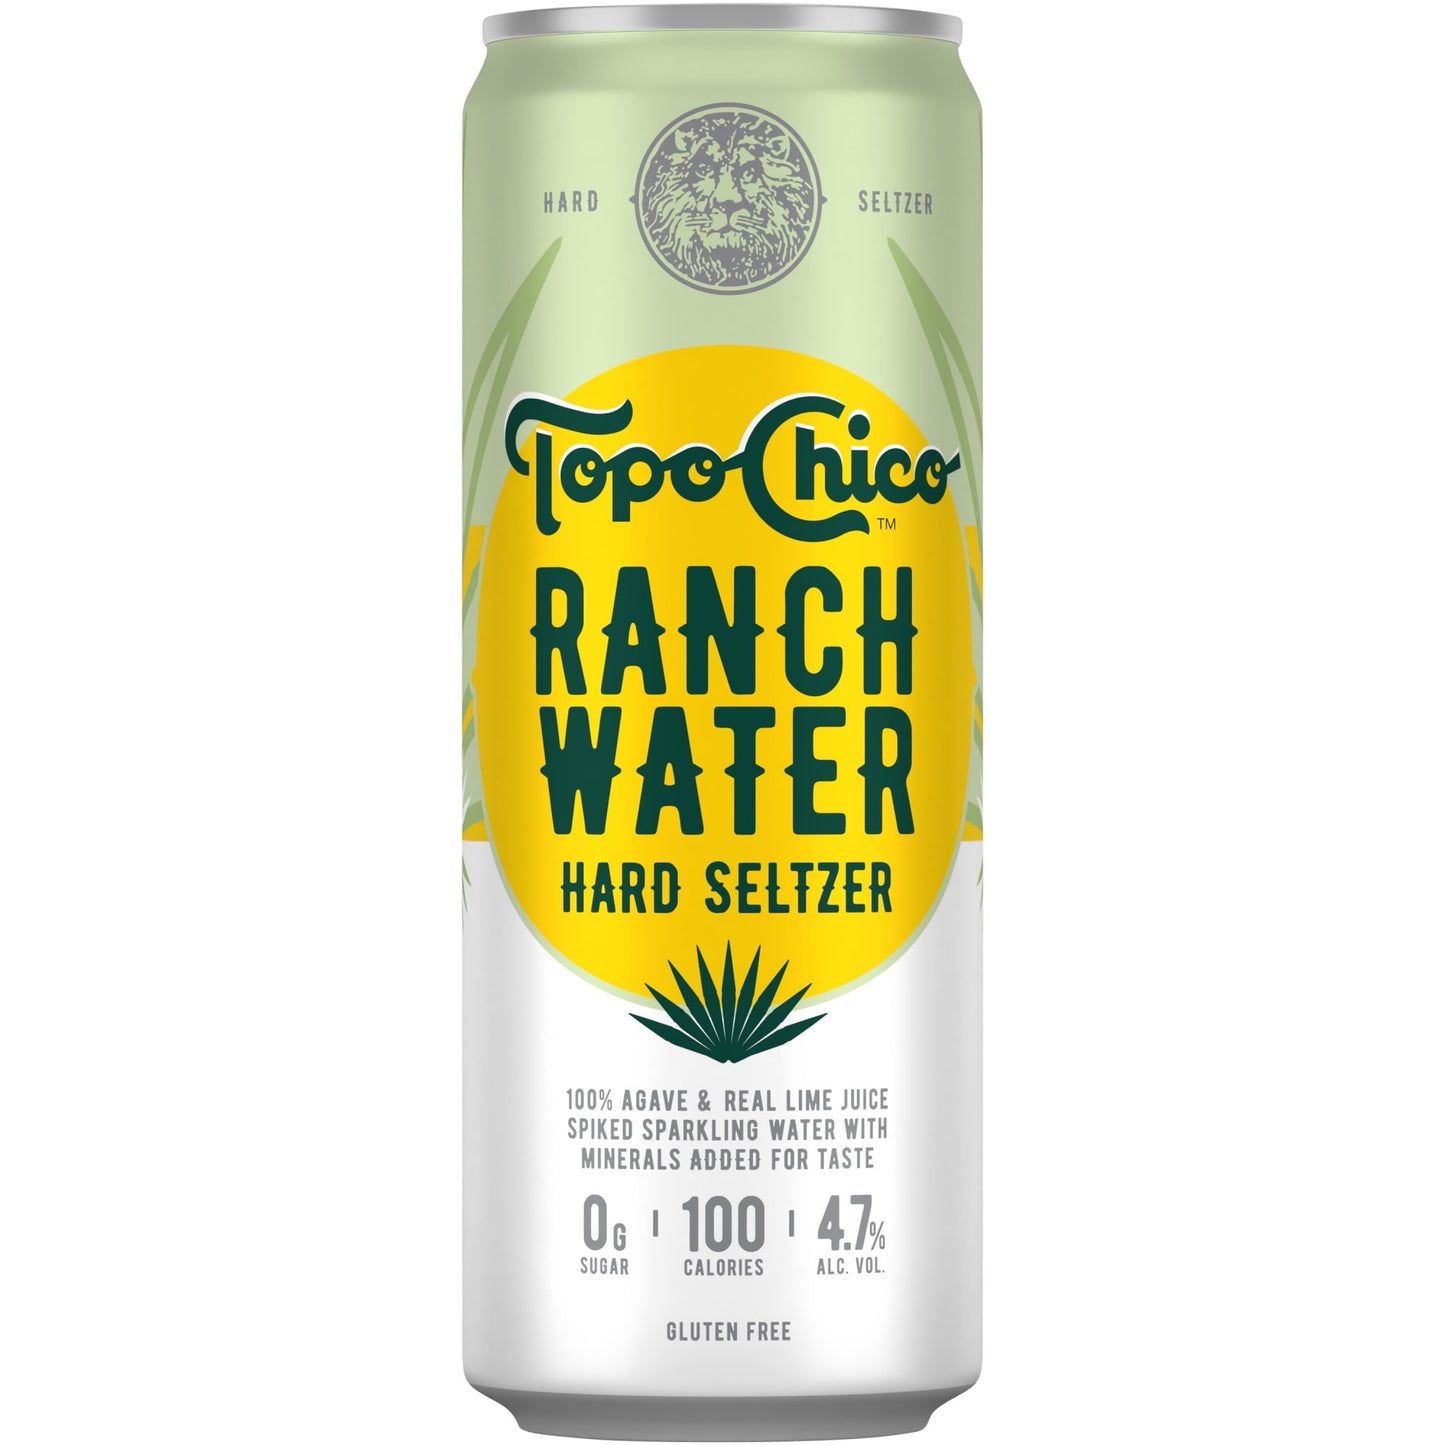 Topo Chico Ranch Water Original  Hard Seltzer, 12 Pack, 12 fl oz Cans, 4.7% ABV